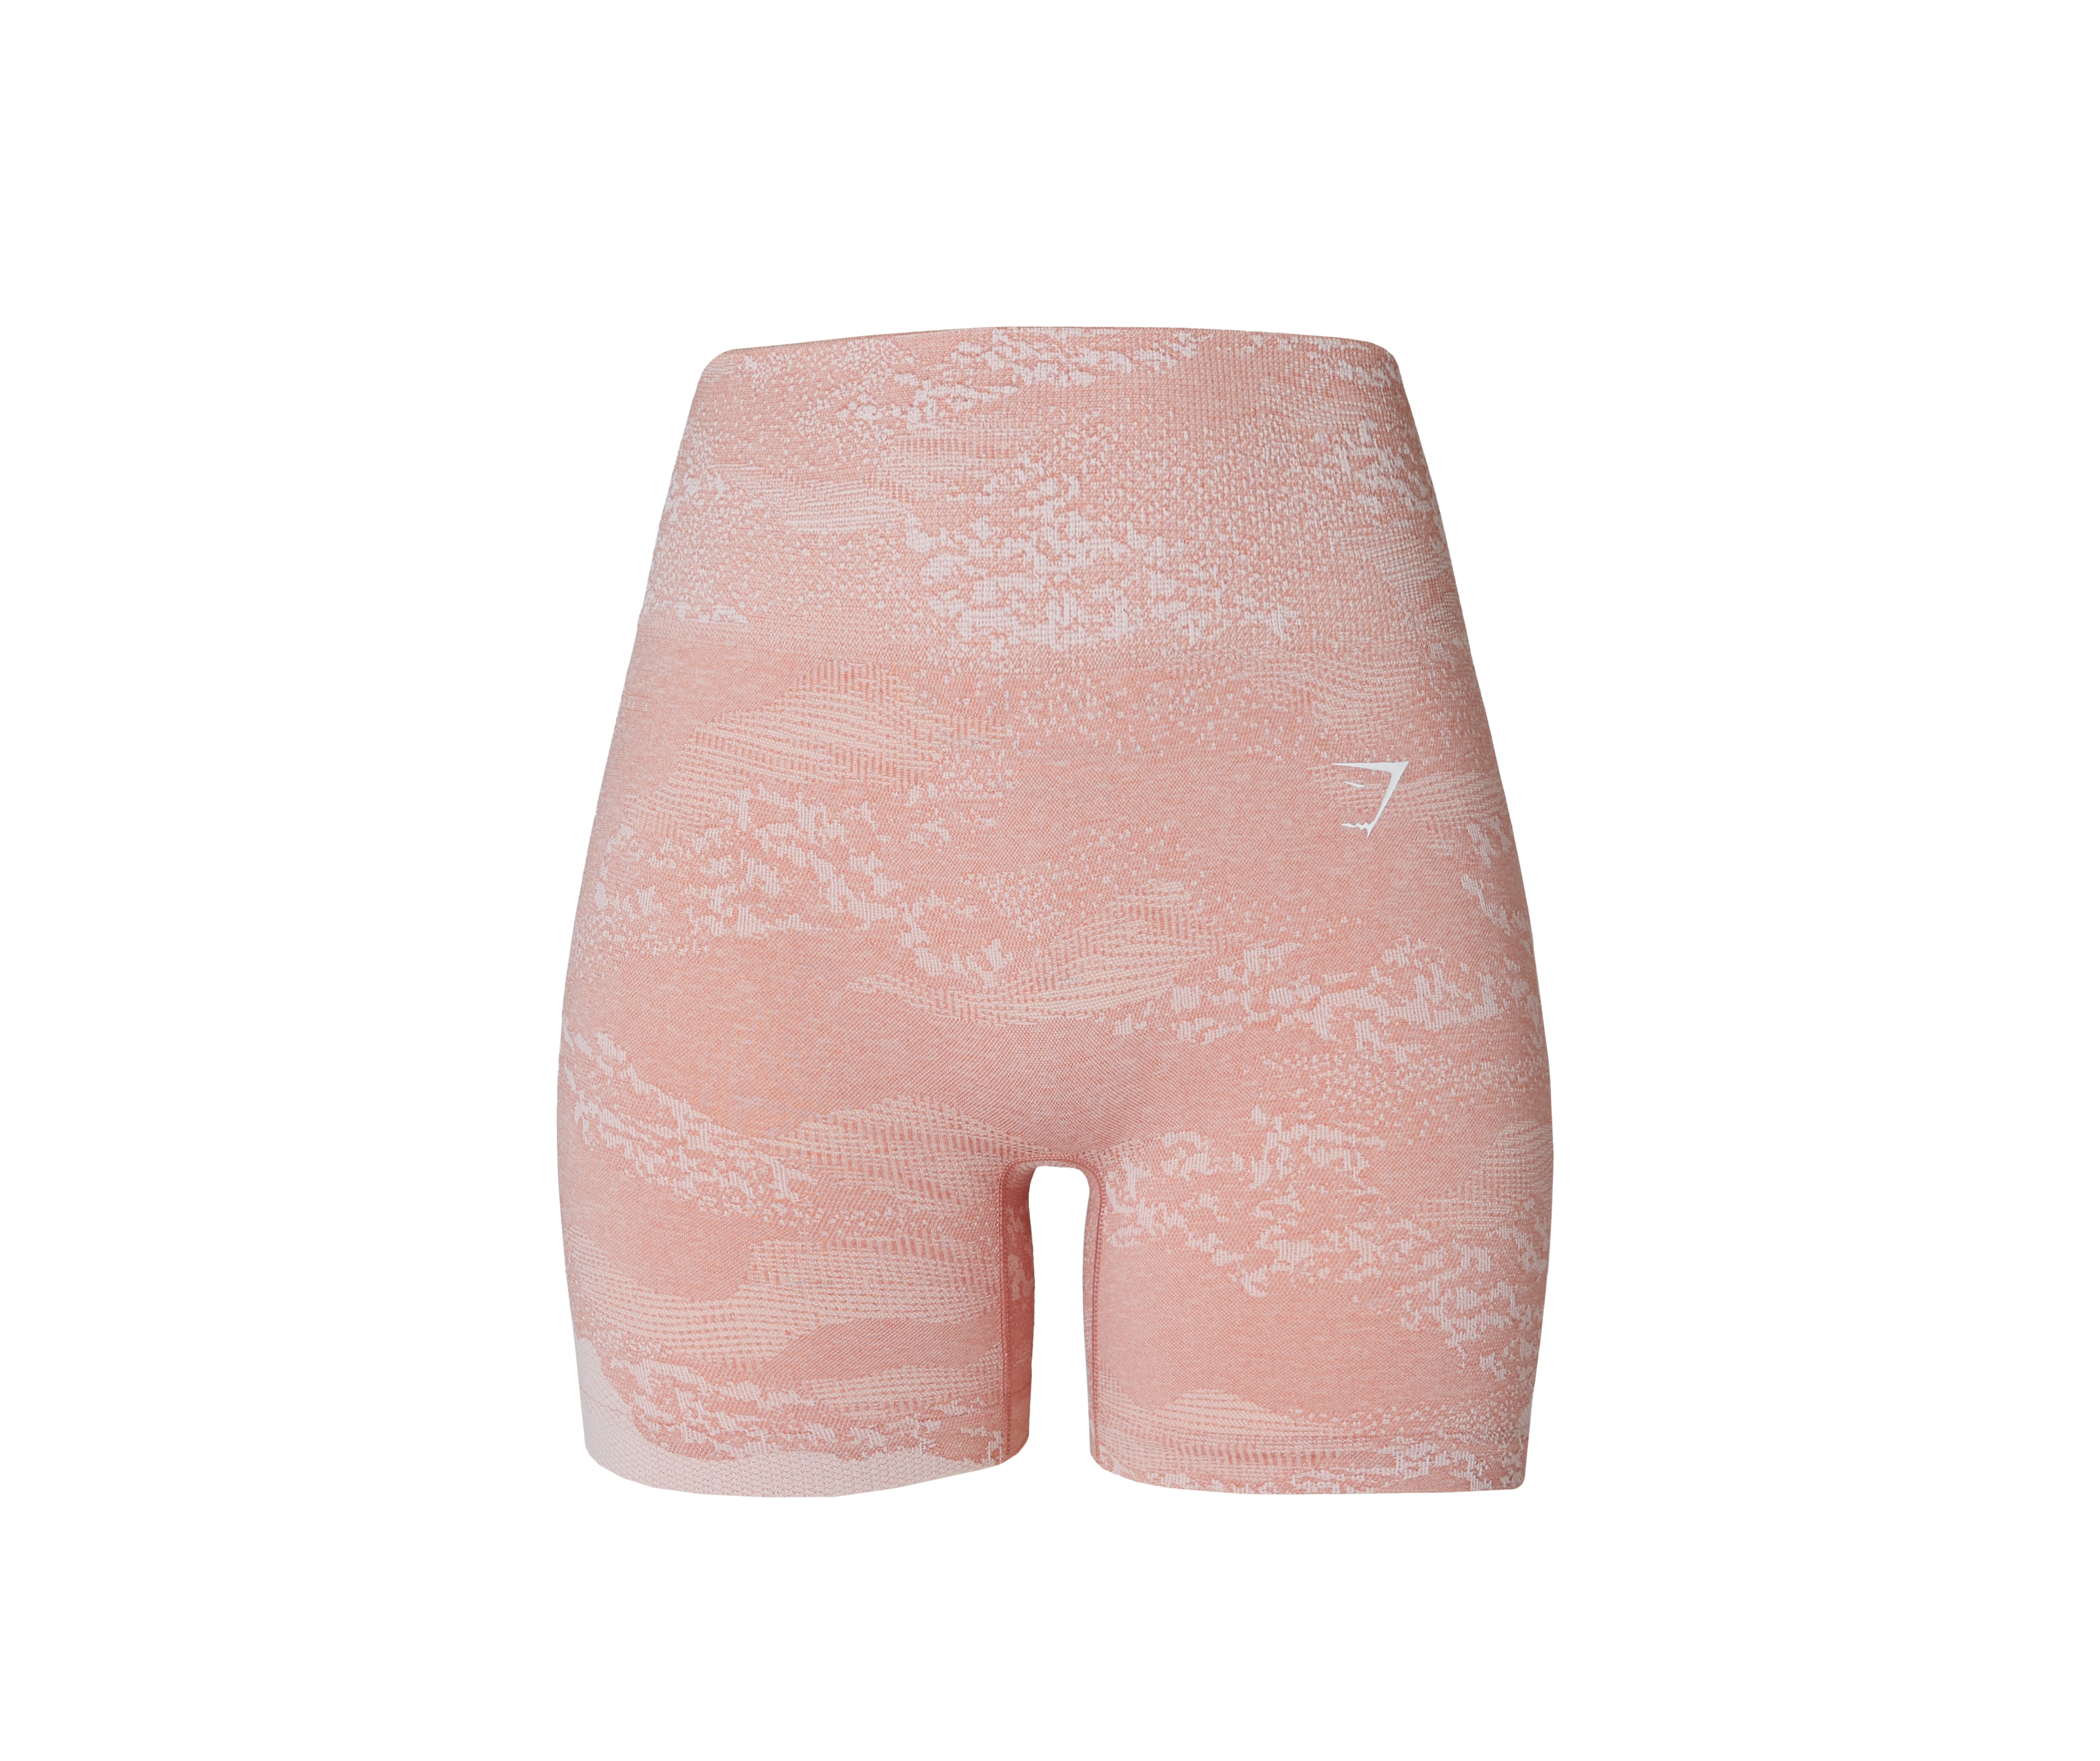 Adapt Camo Seamless Shorts in Misty Pink/Hazy Pink - view 6